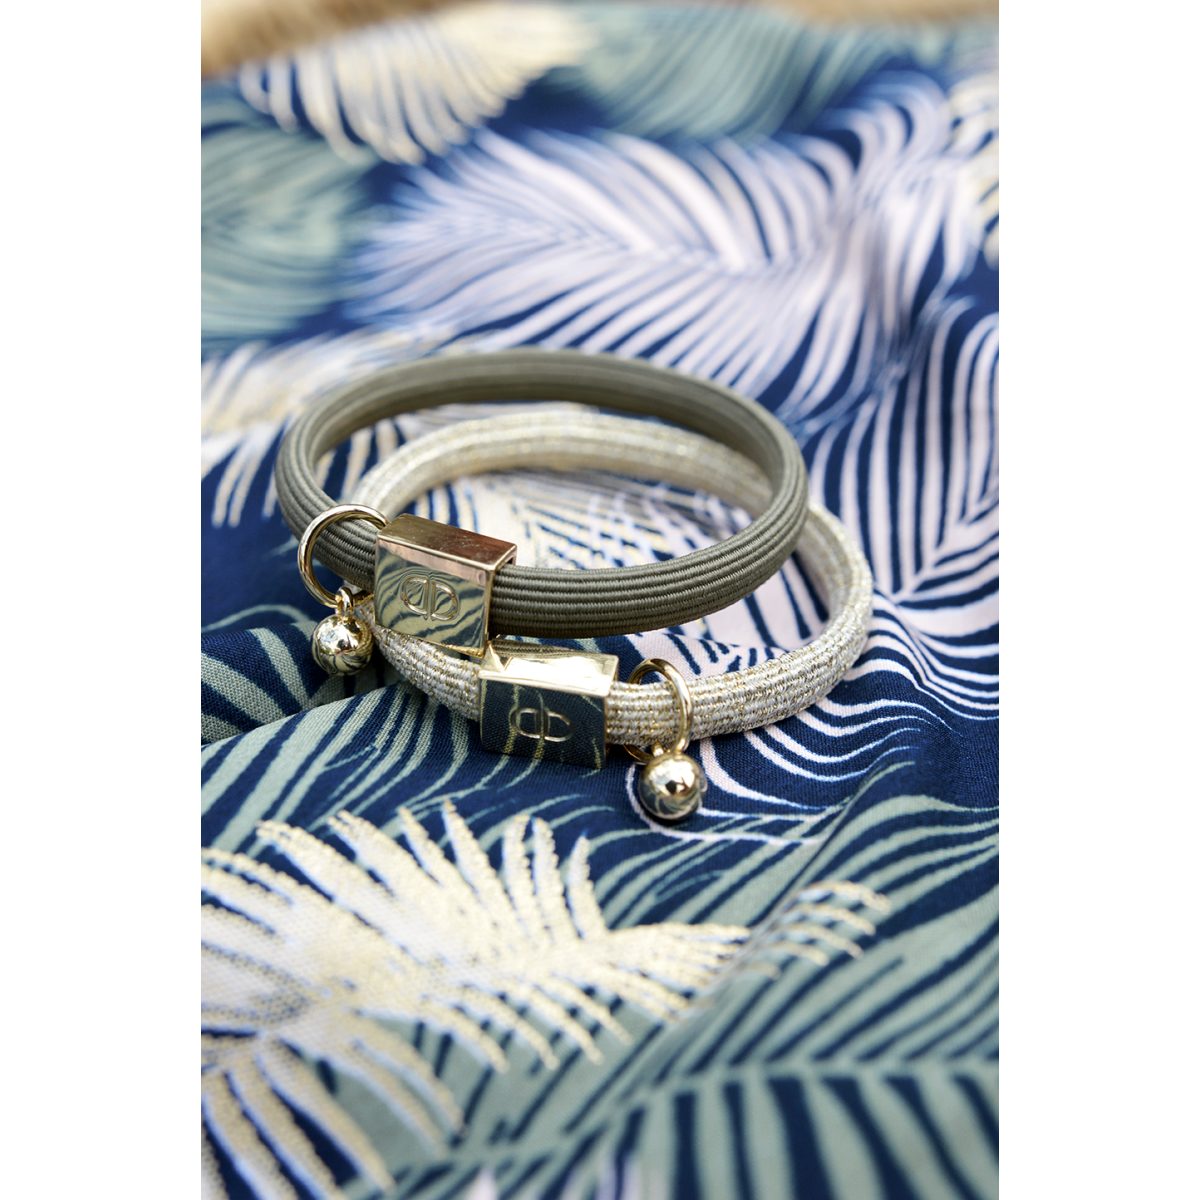 Armband oliv DELIGHT DEPARTMENT www.myhomeandmore.de